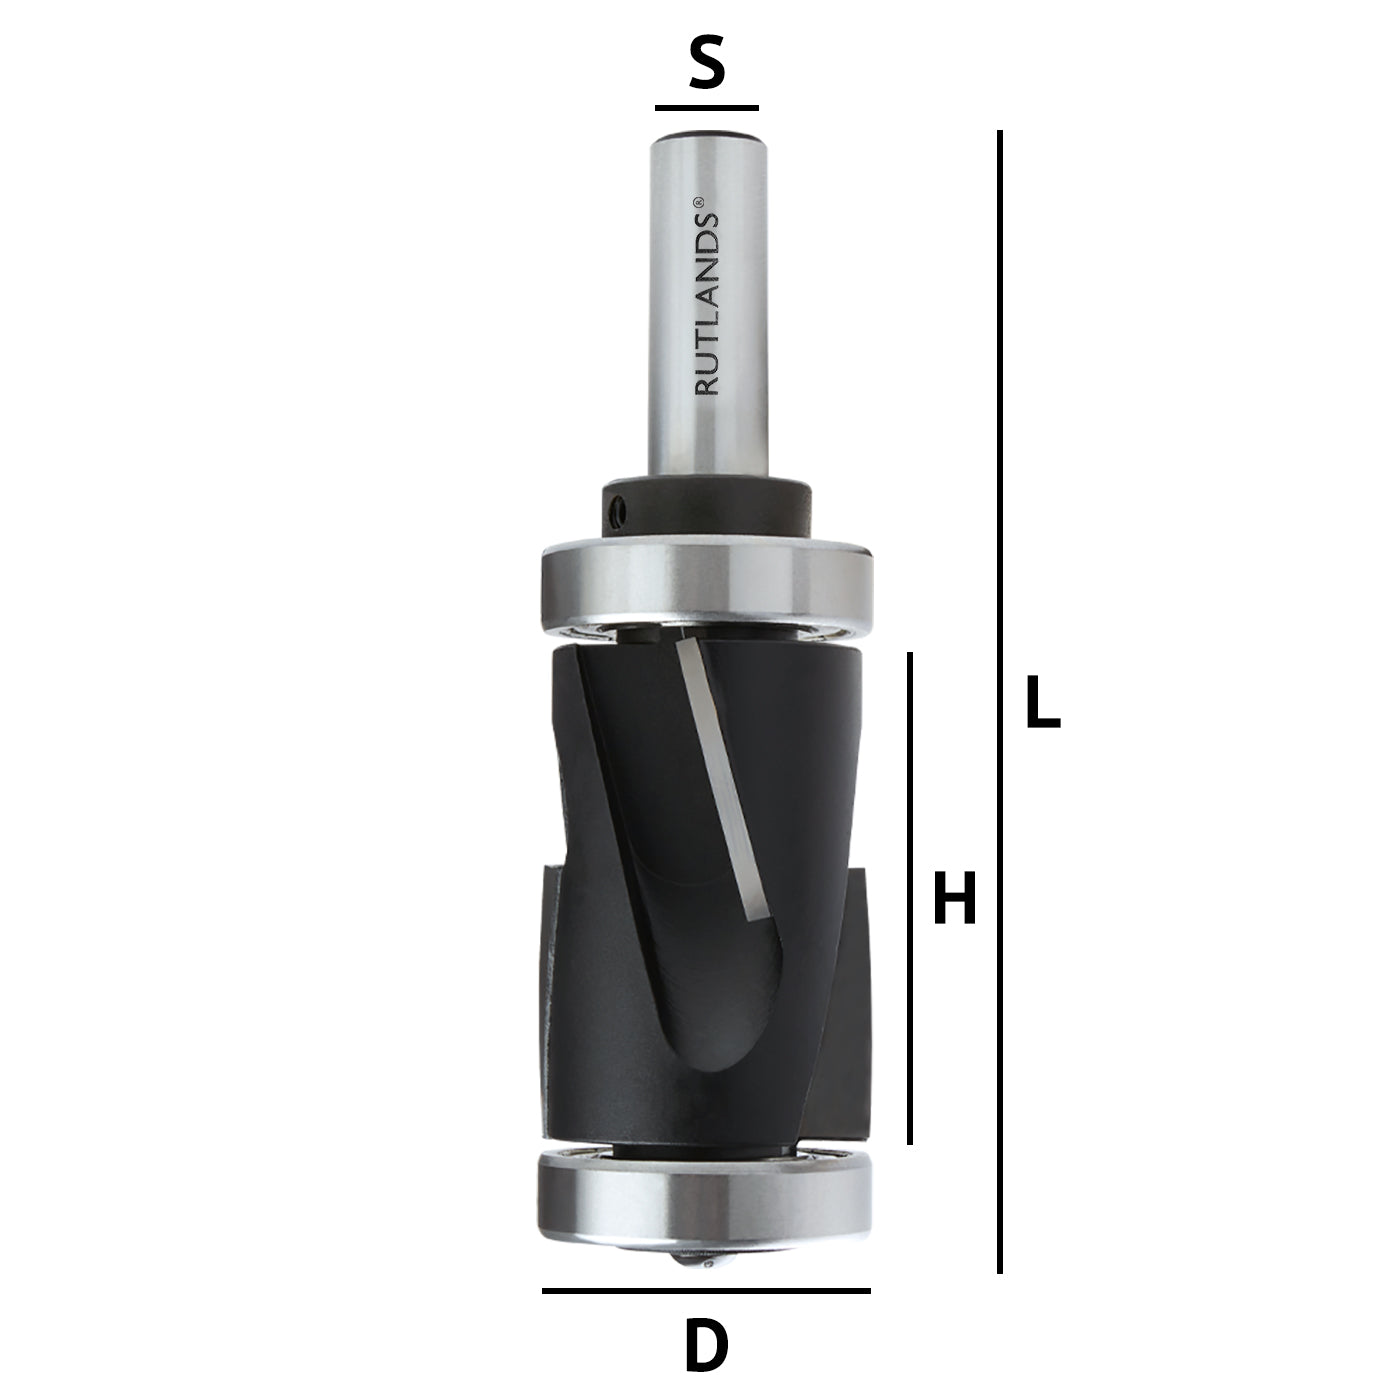 Router Bit - Flush Trim Up and Down Shear